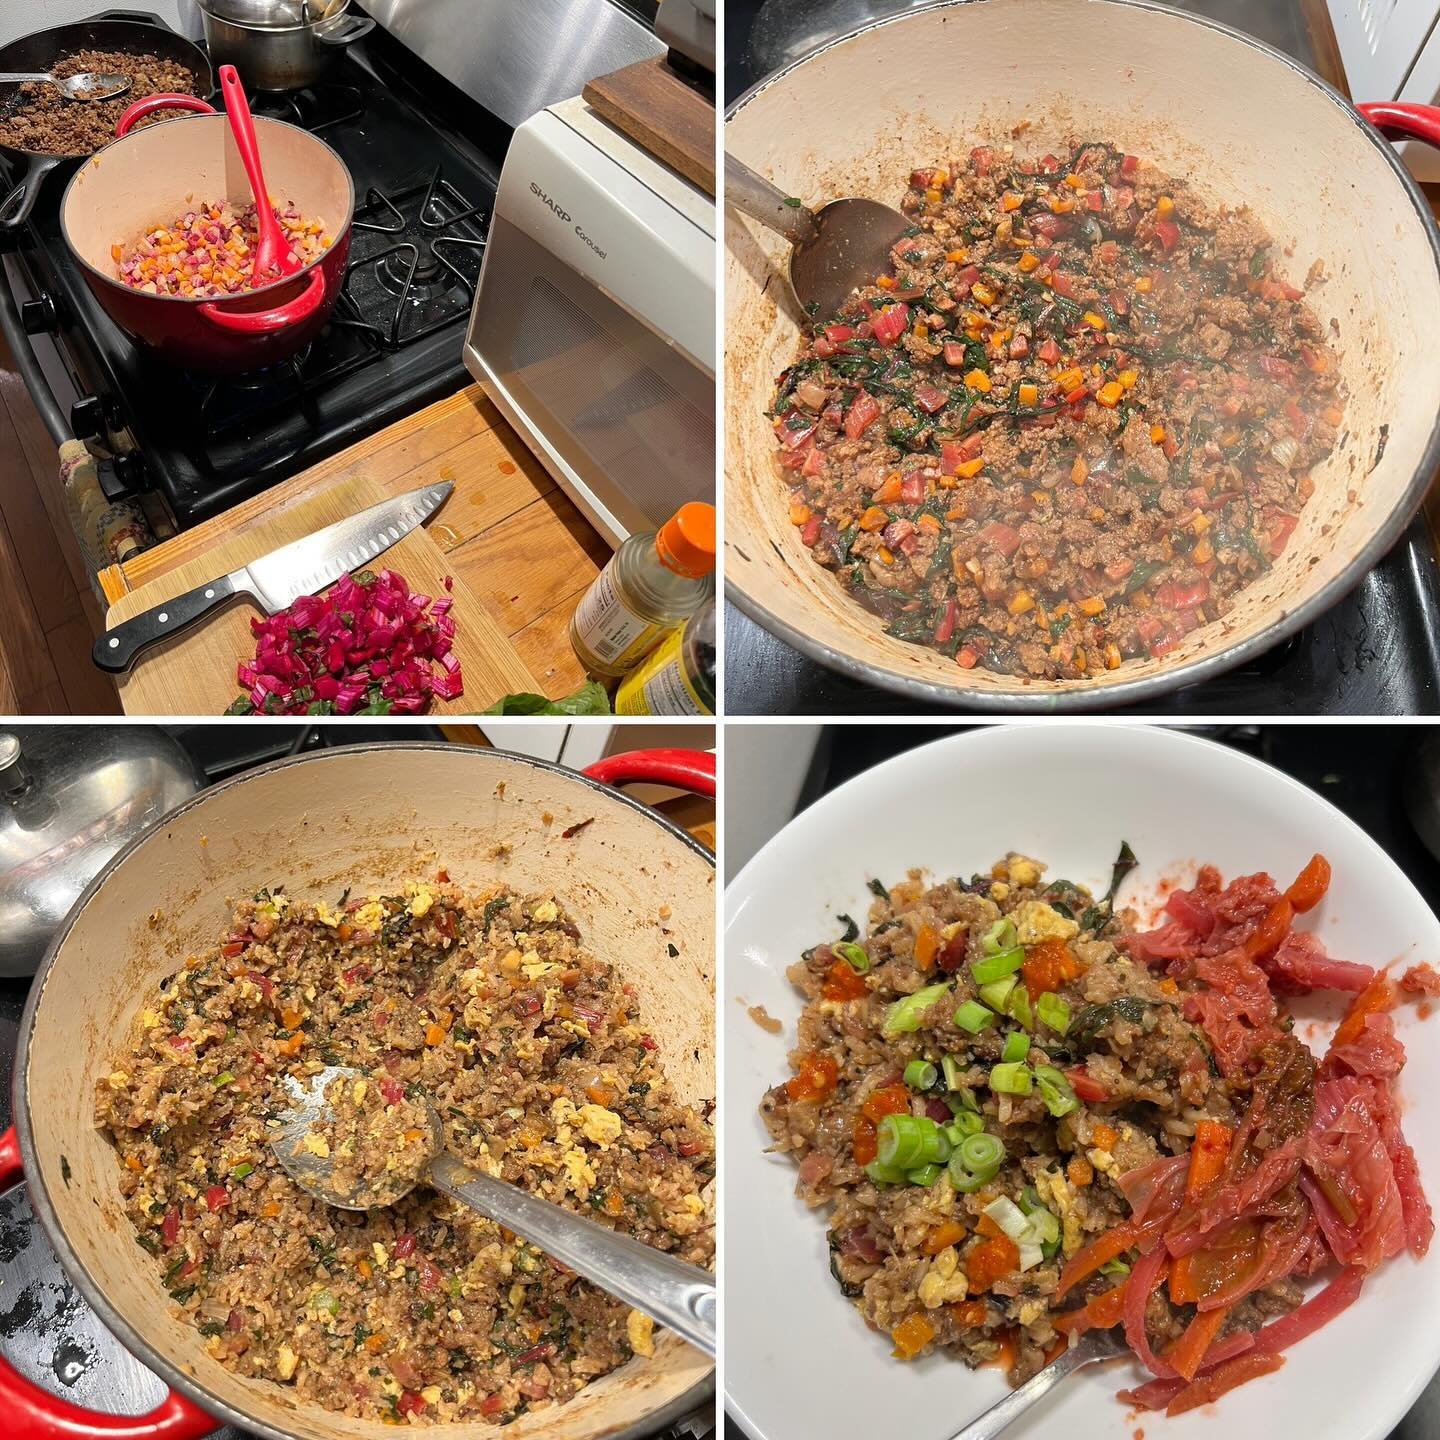 What&rsquo;s cooking in your kitchen lately?!

Here&rsquo;s a round up of what we&rsquo;ve been making to give you some ideas for what to do with all our spring bounty.

1. Swiss Chard &amp; Beef Fried Rice: Jasmine rice, browned ground beef with gar